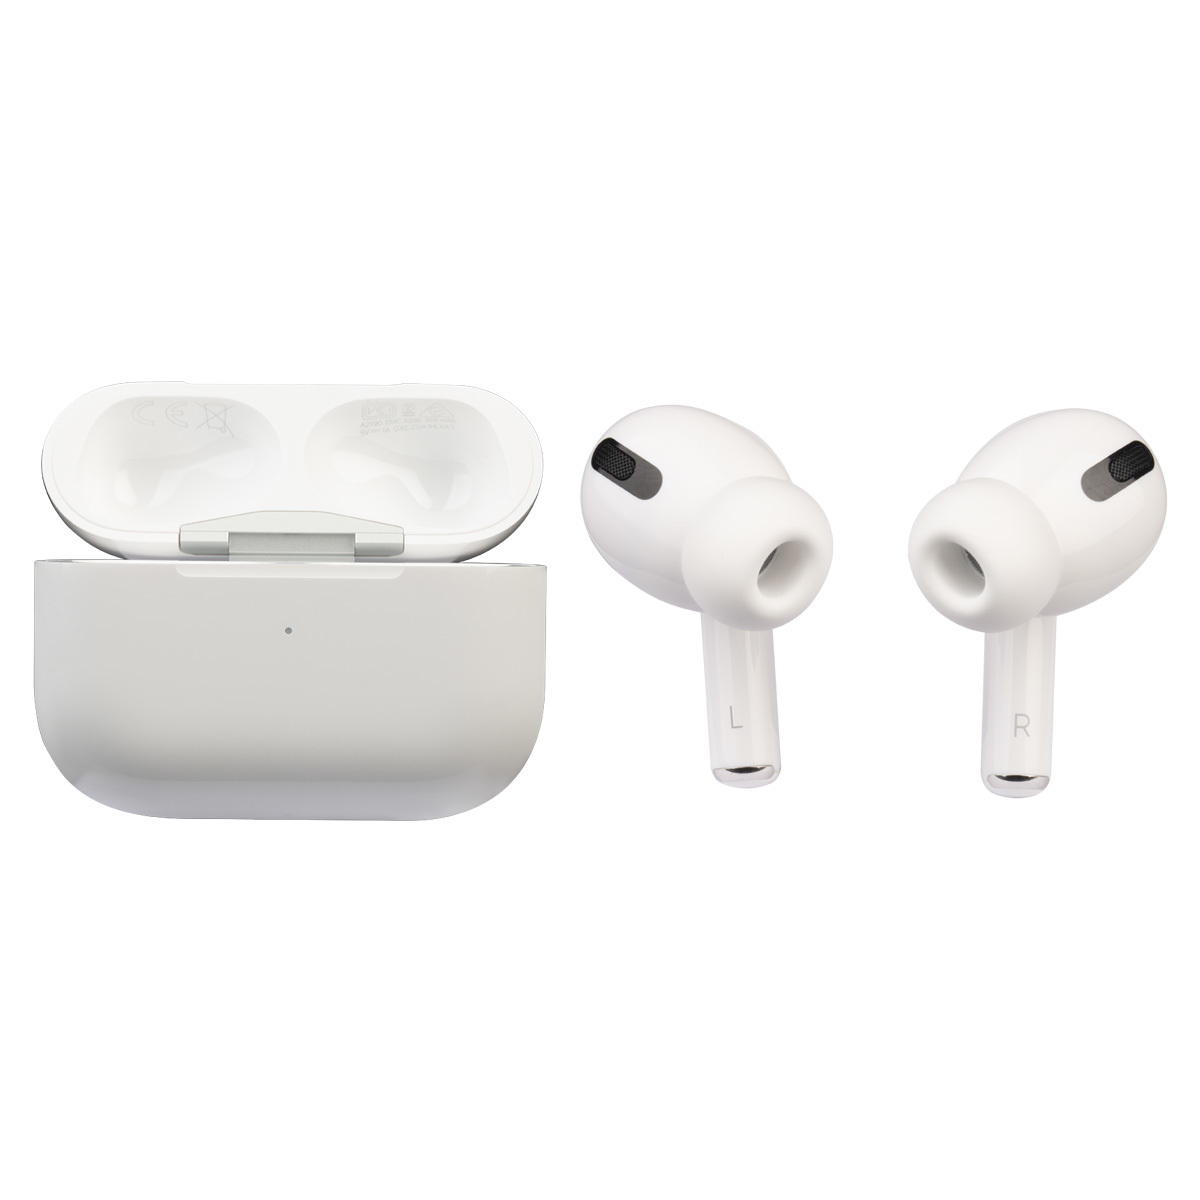 For iPhone AirPods Pro with Wireless AirPod Charging Case (MWP22ZM/A) - The Repair